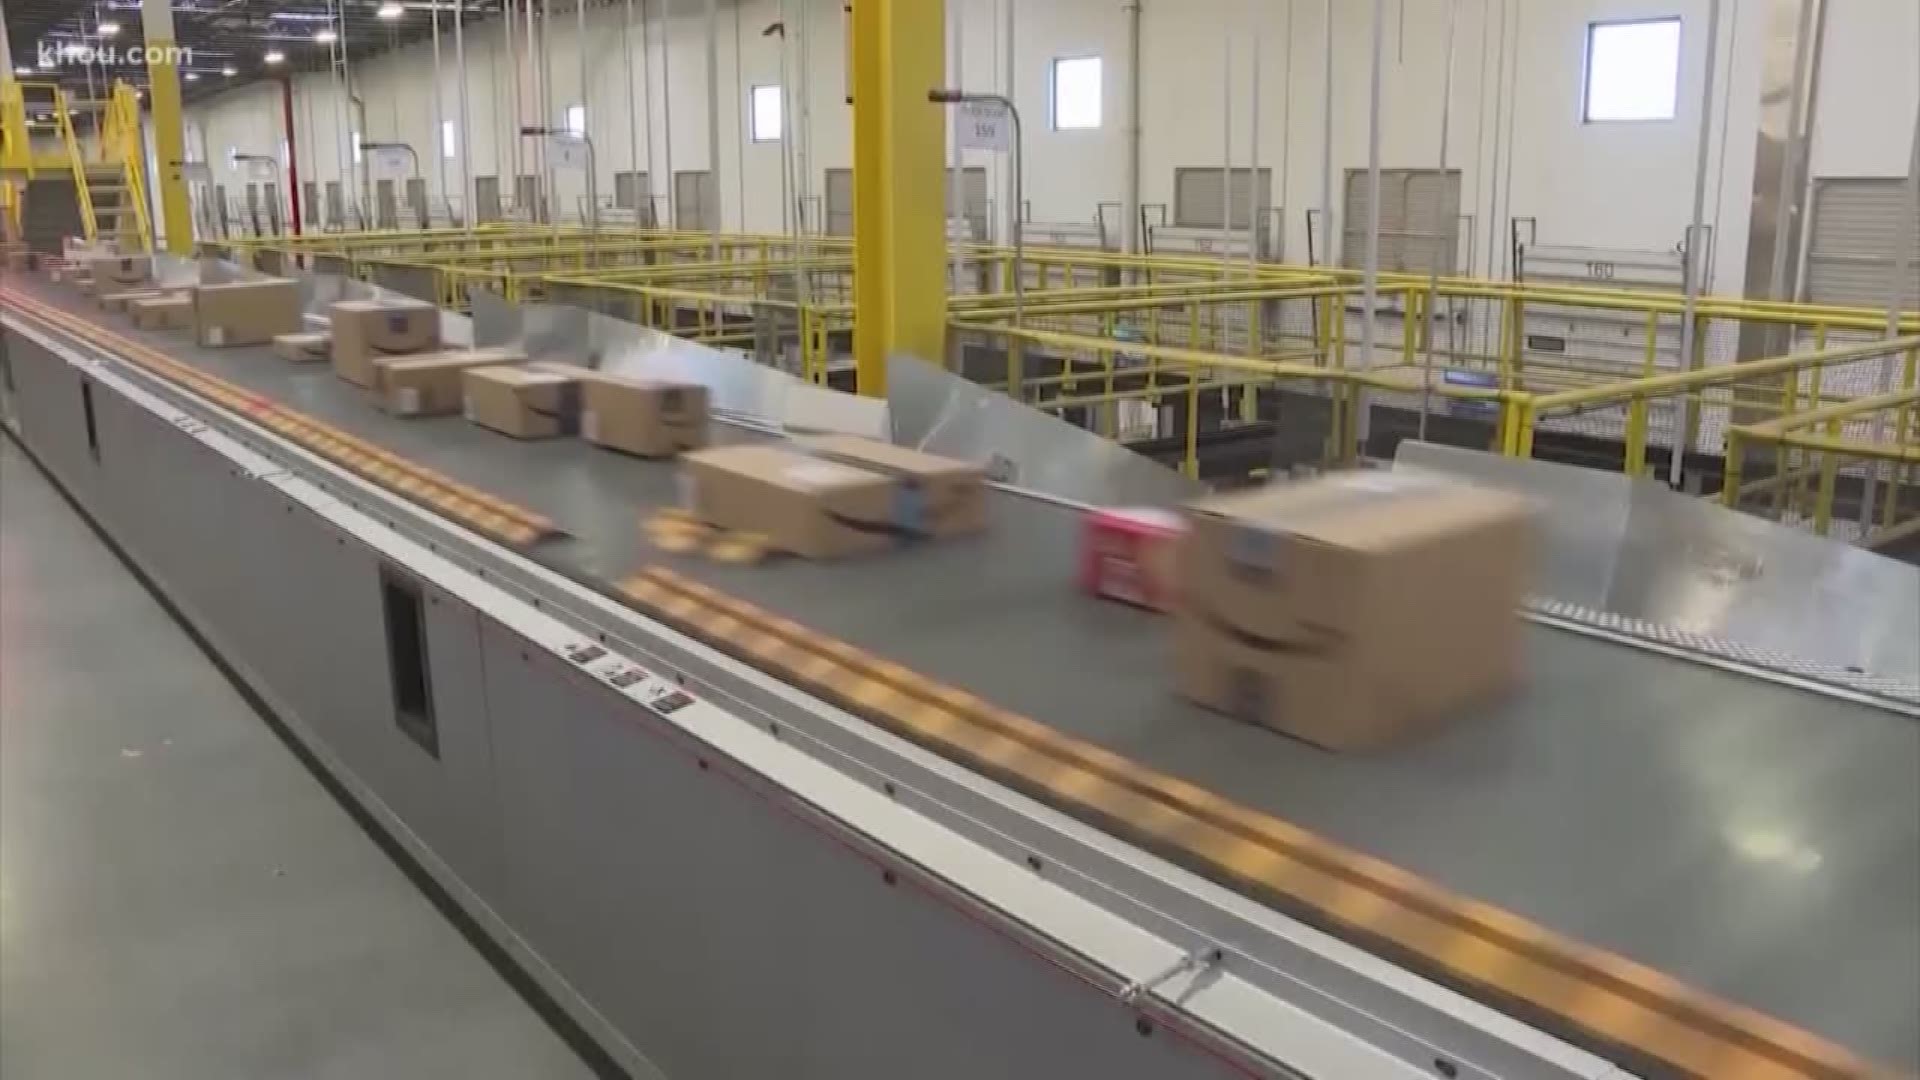 An eye-opening new investigation by ProPublica shows the human toll of Amazon’s fast and free shipping.